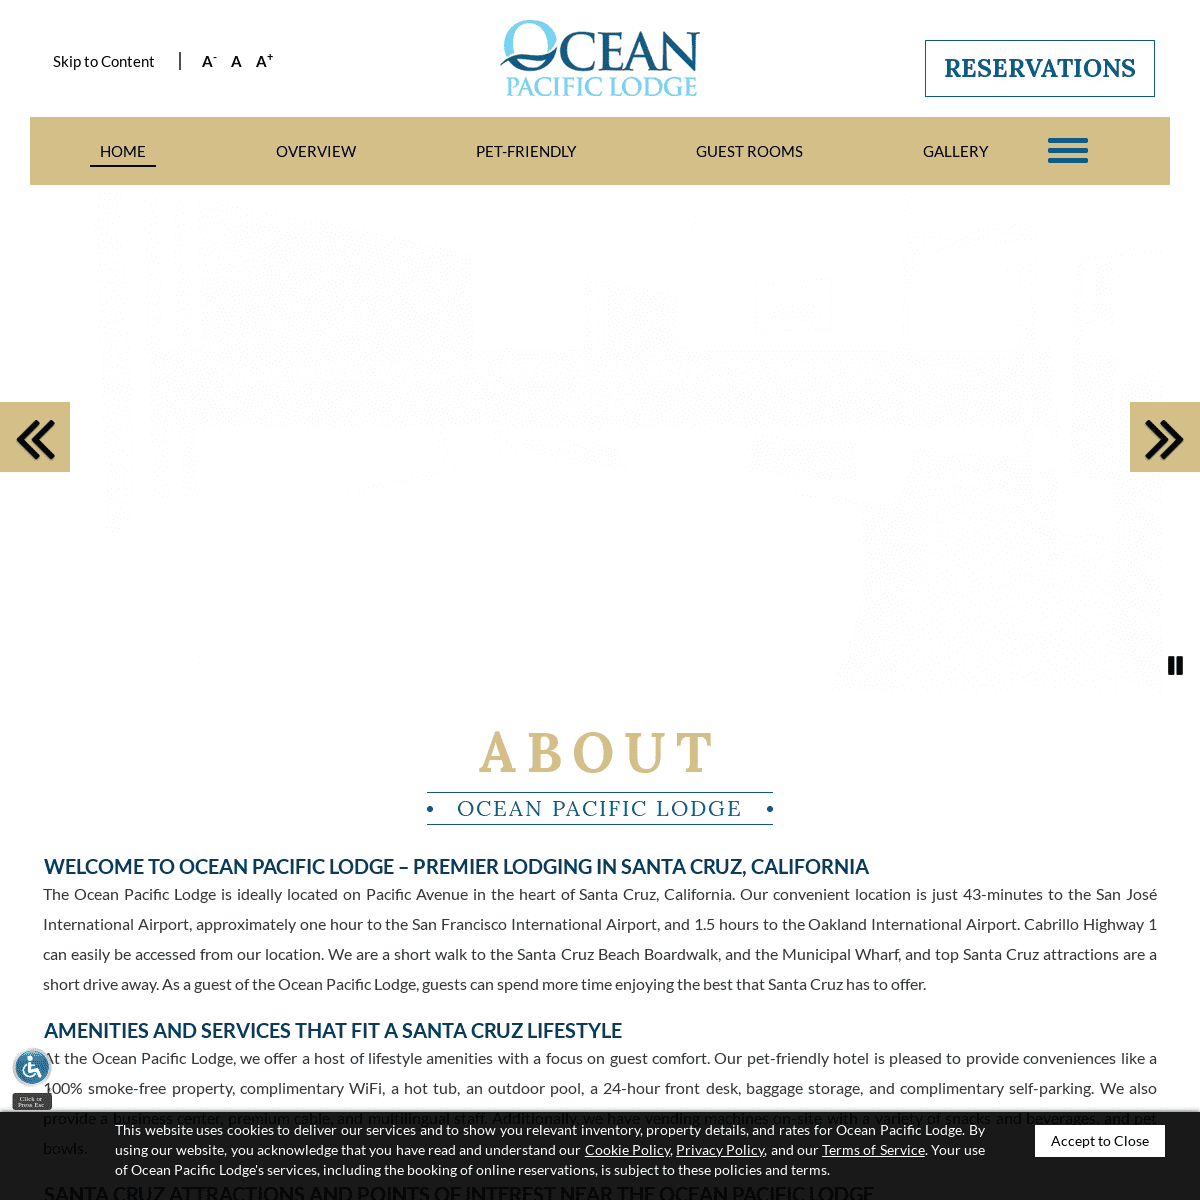 A complete backup of theoceanpacificlodge.com